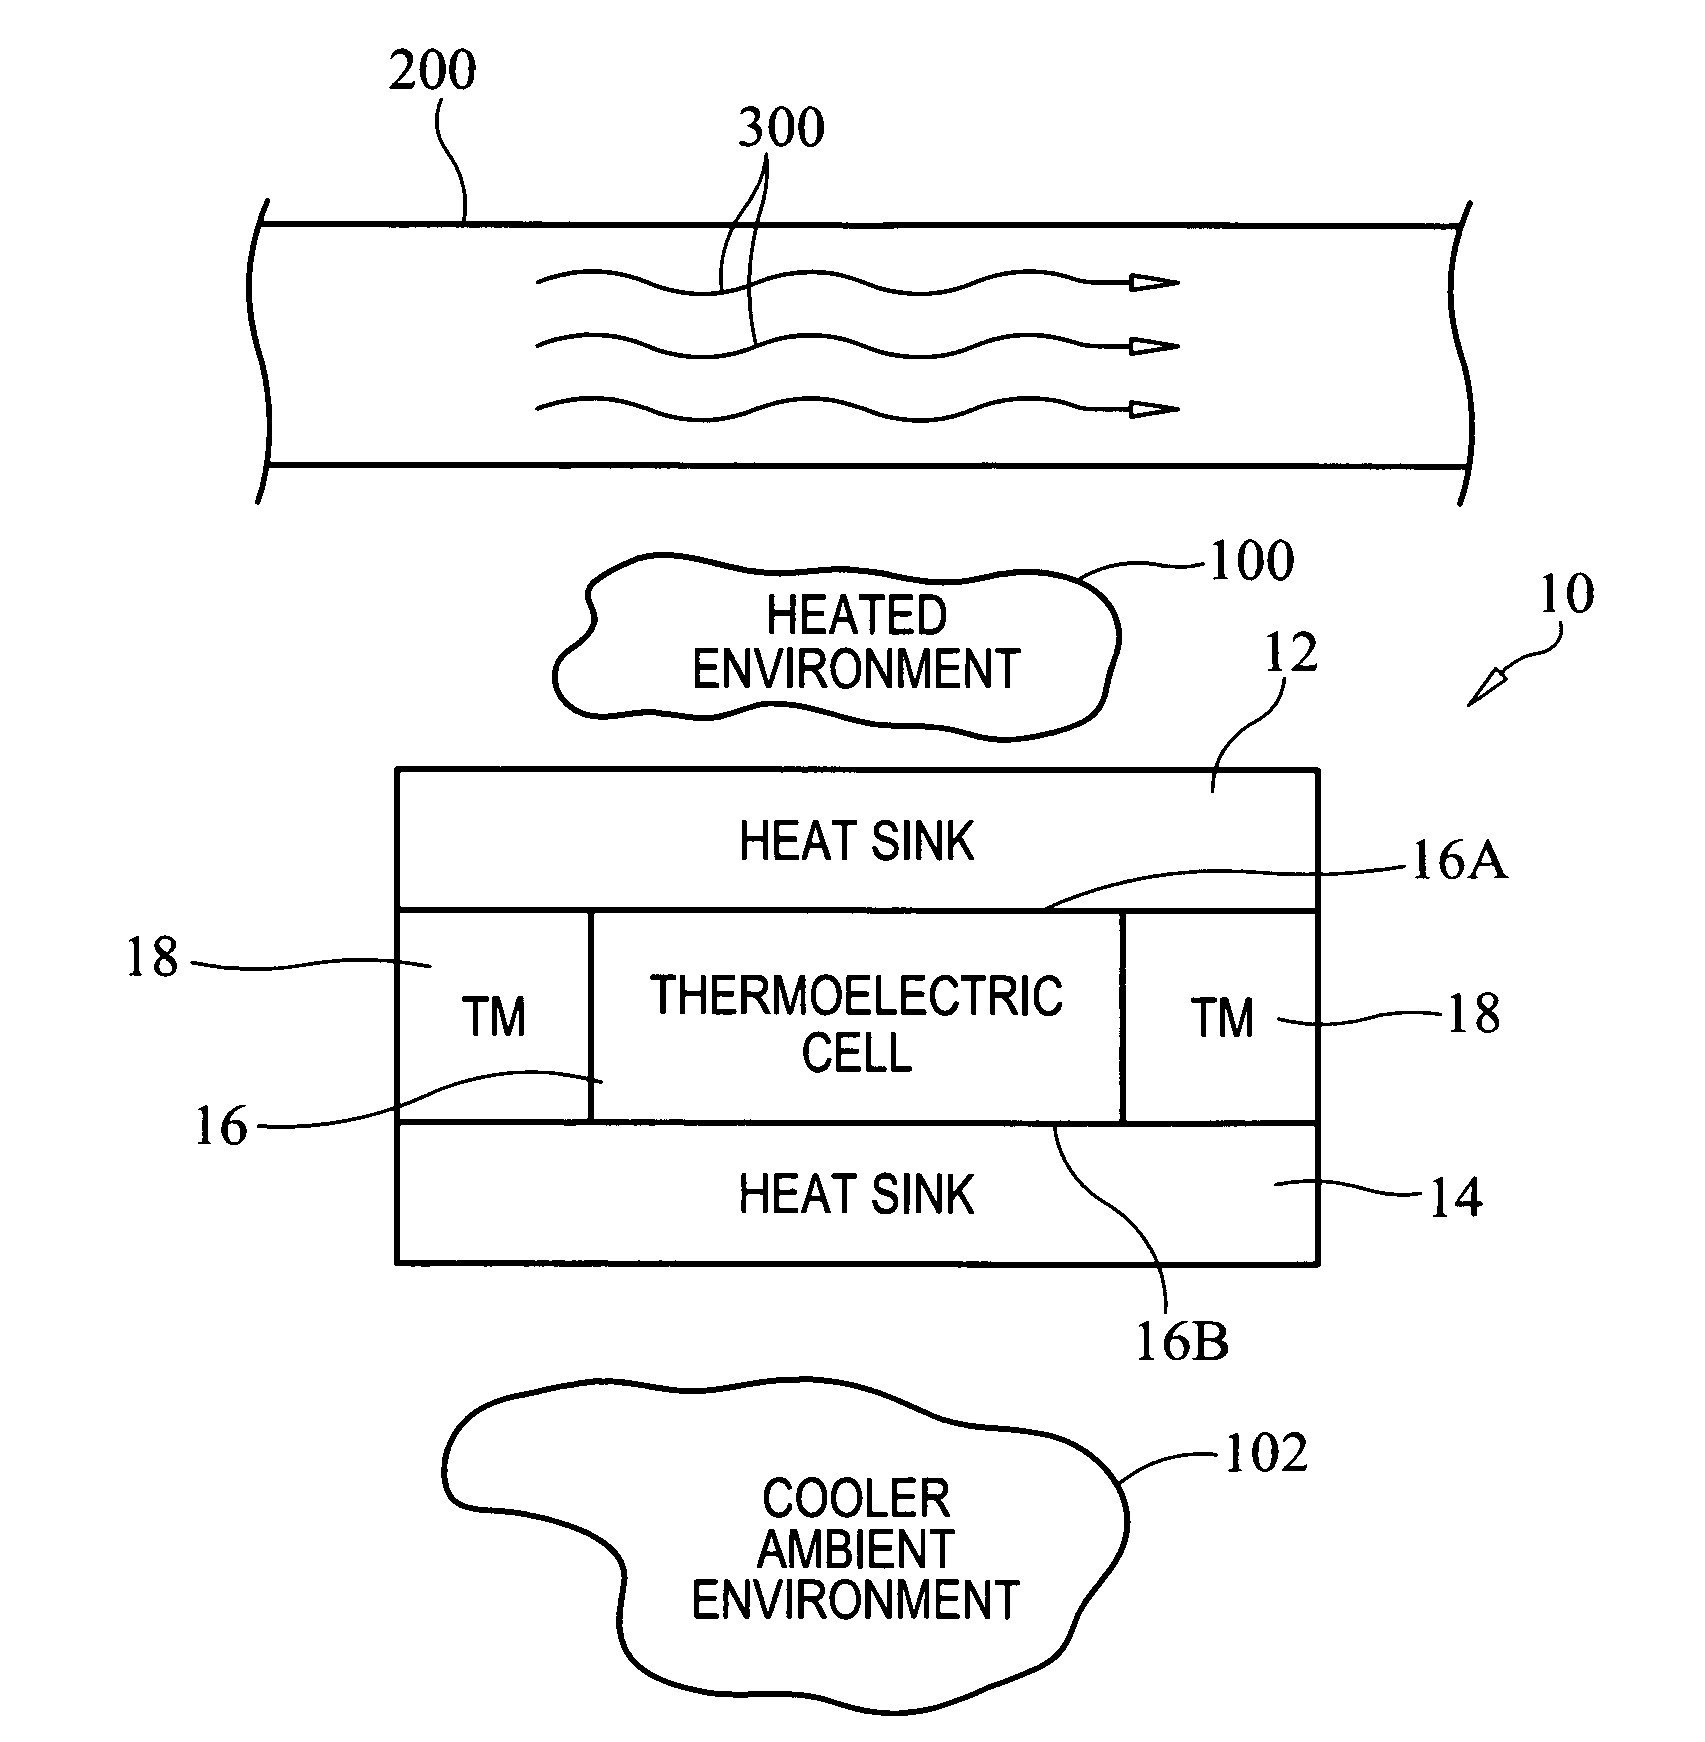 Thermal effluent to electric energy harvesting system